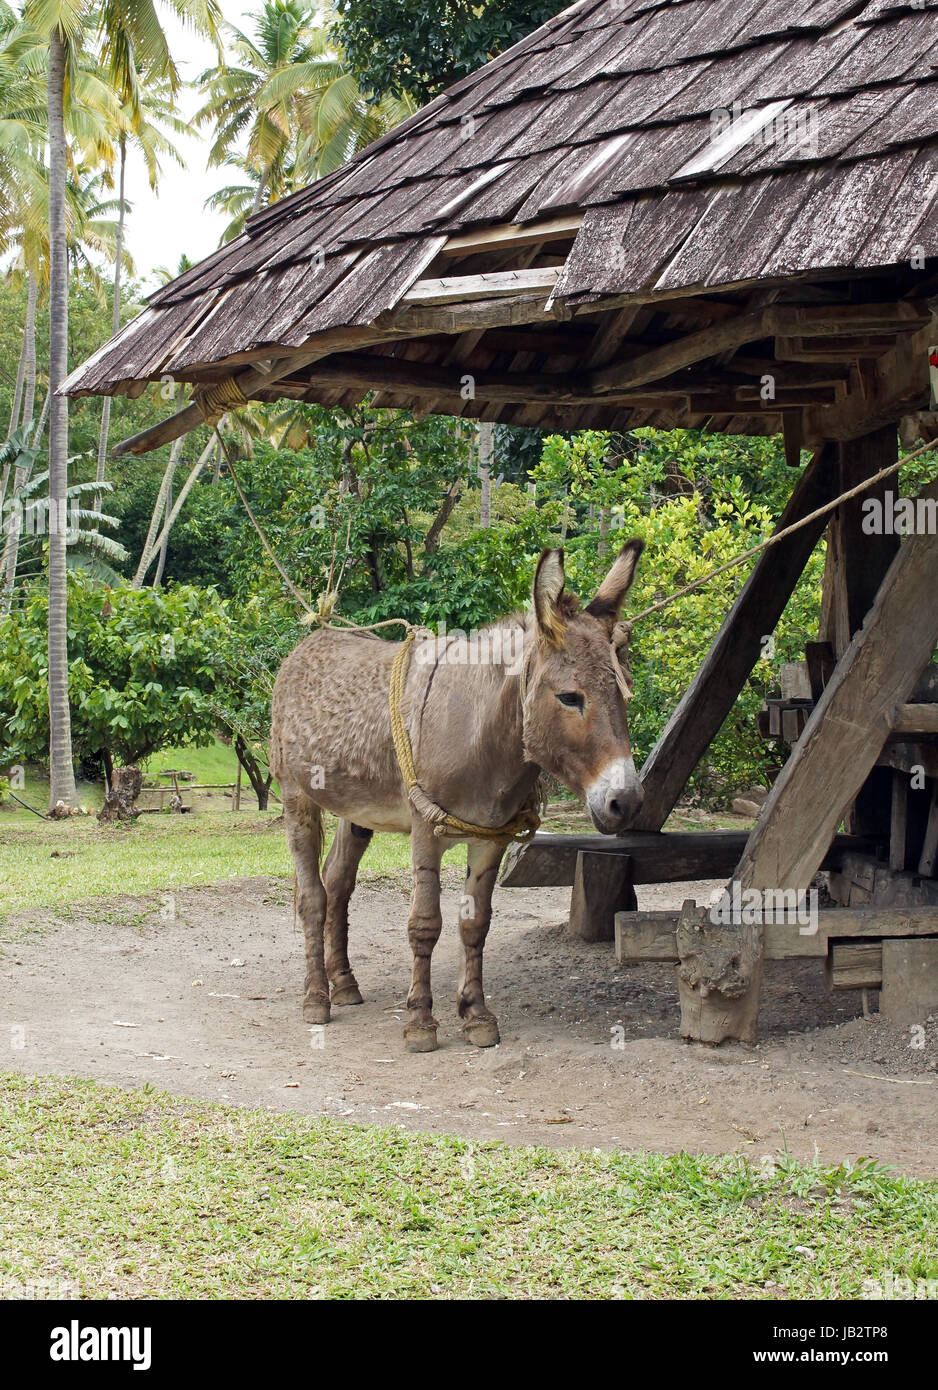 Donkey working on a historic cane mill, Saint Lucia, Caribbean Stock Photo